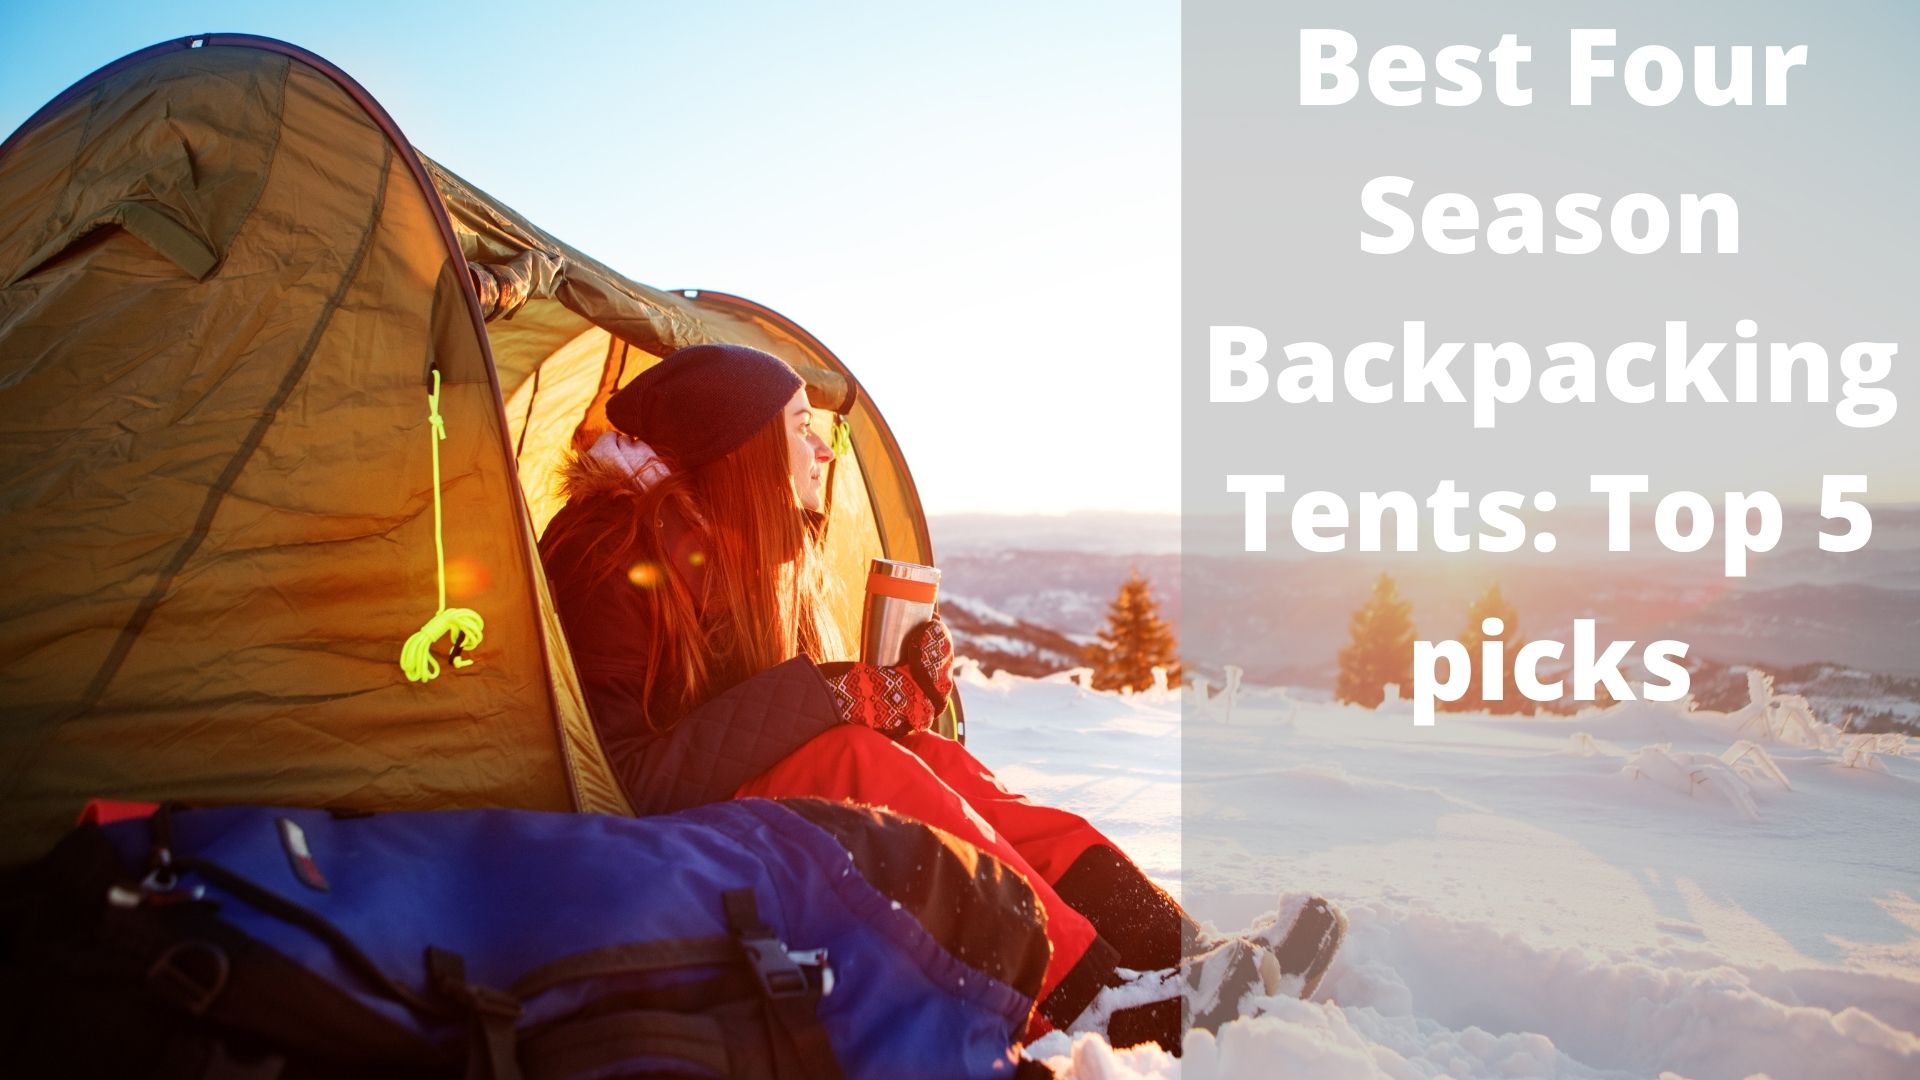 5 Best Four Season Backpacking Tents for 2022